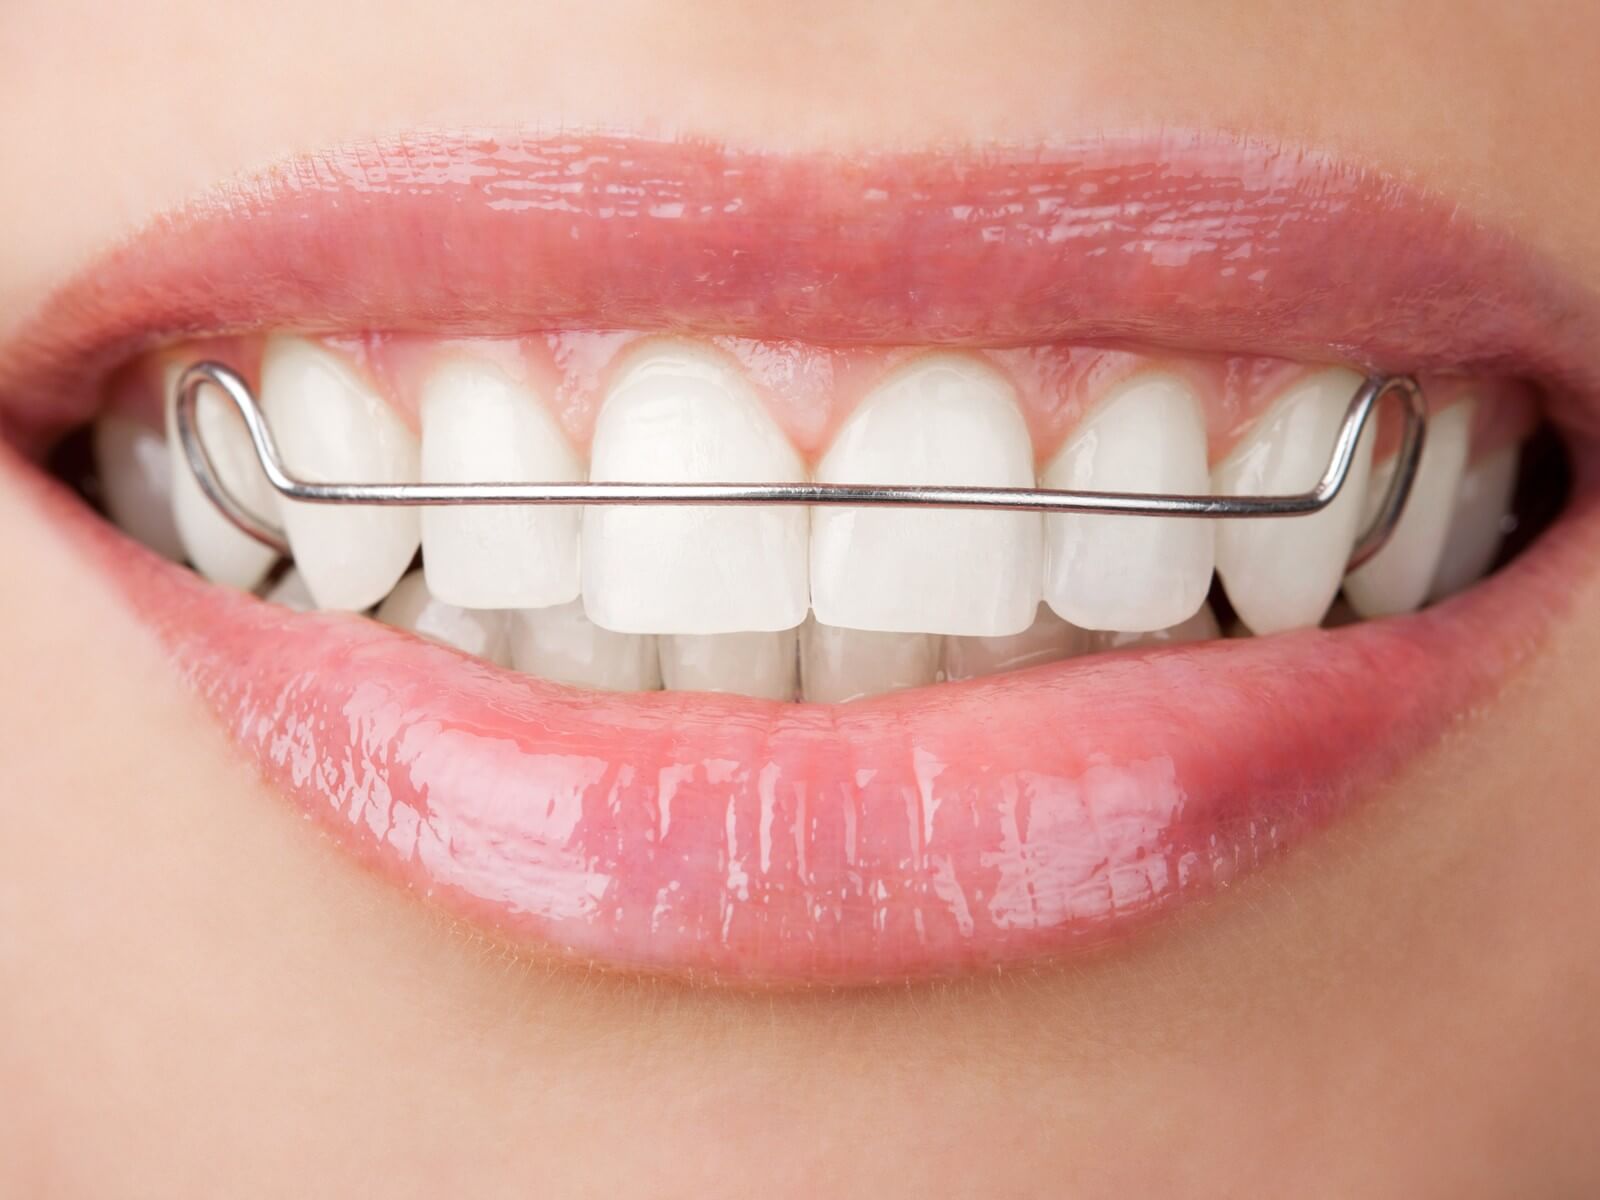 Can You Wear An Old Retainer To Straighten Teeth?